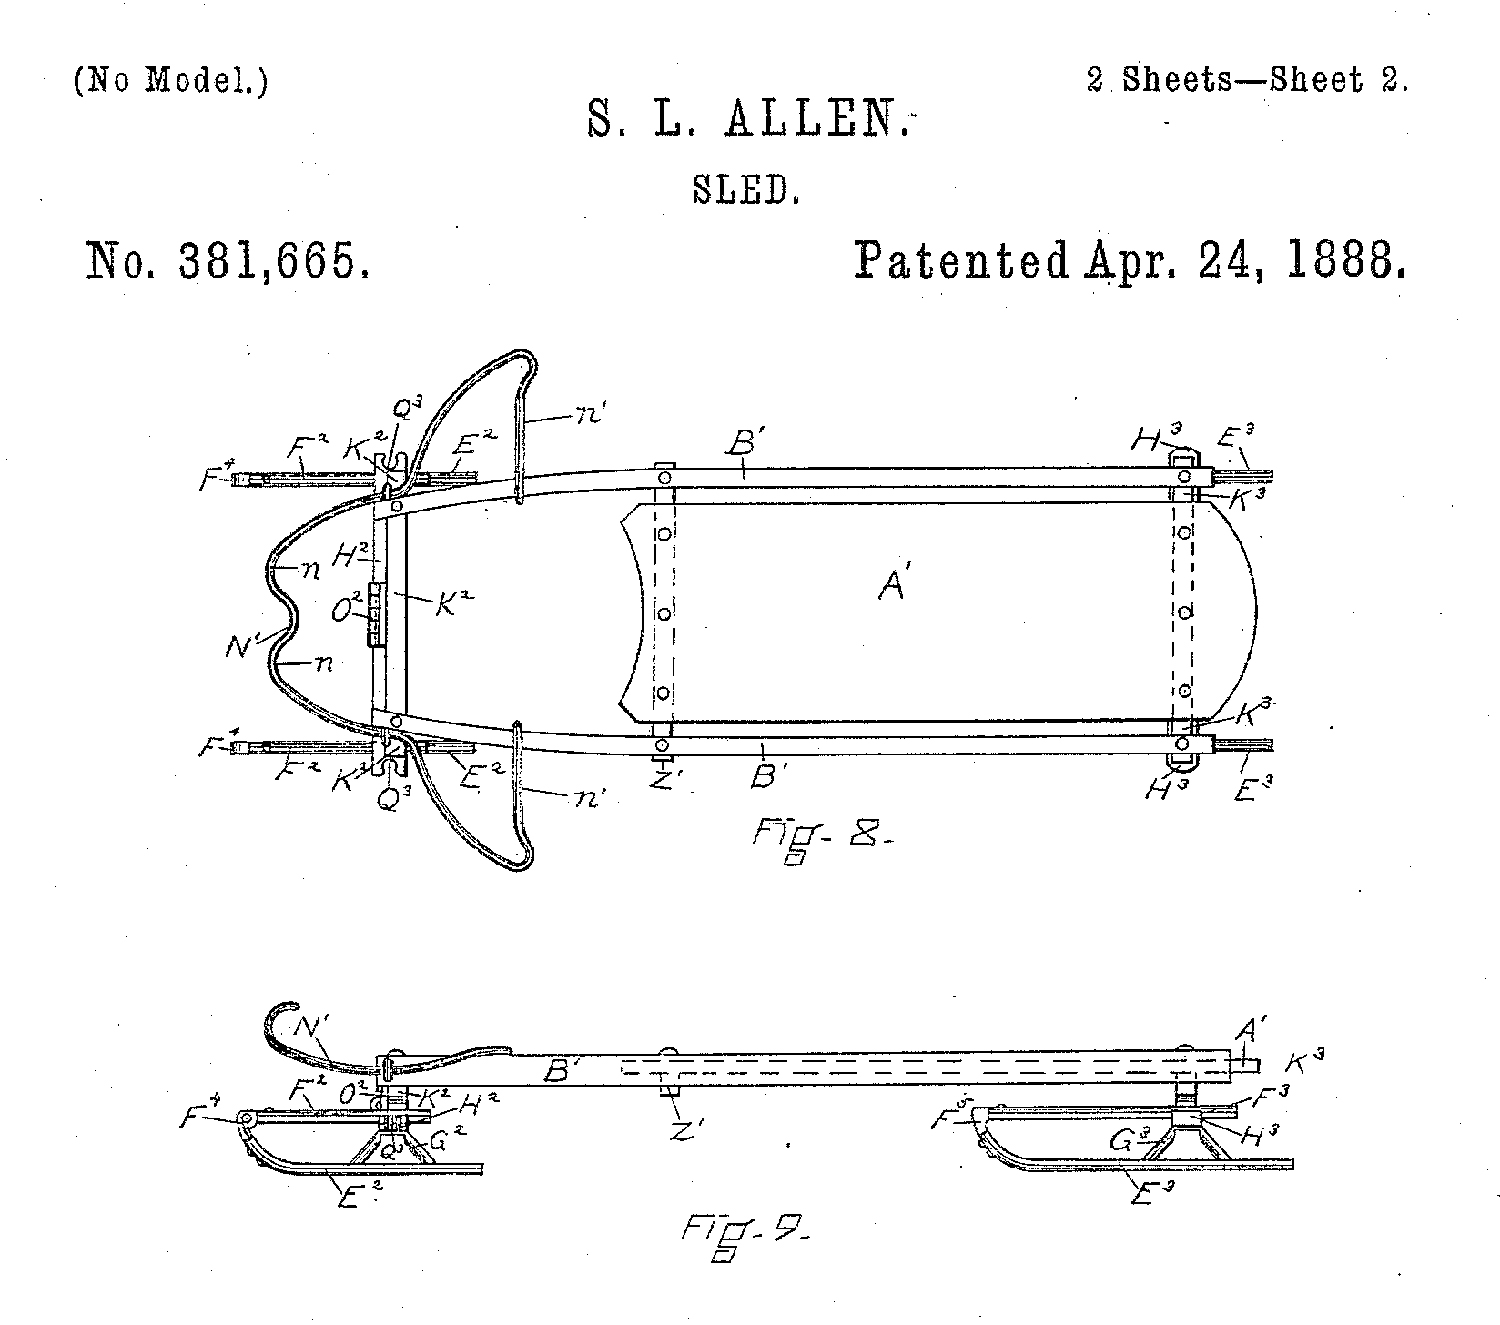 Patent drawings of a sled, showing steering mechanism and runners. 